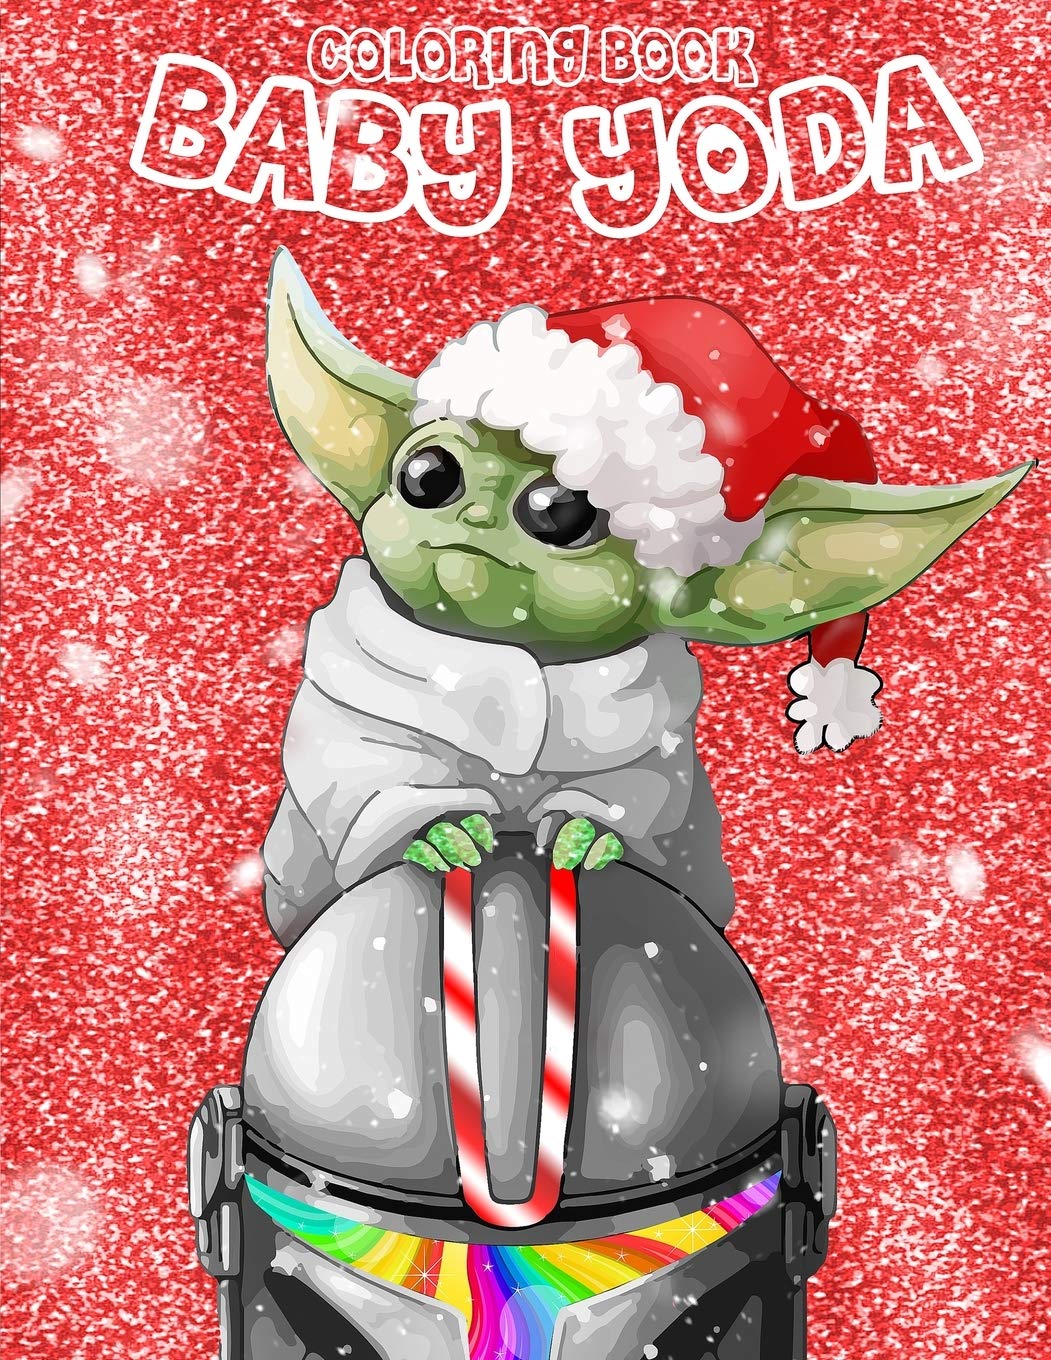 Baby yoda coloring book christmas gift for kids and adults unique baby yoda mashup illustrations baby yoda christmas by sam orten